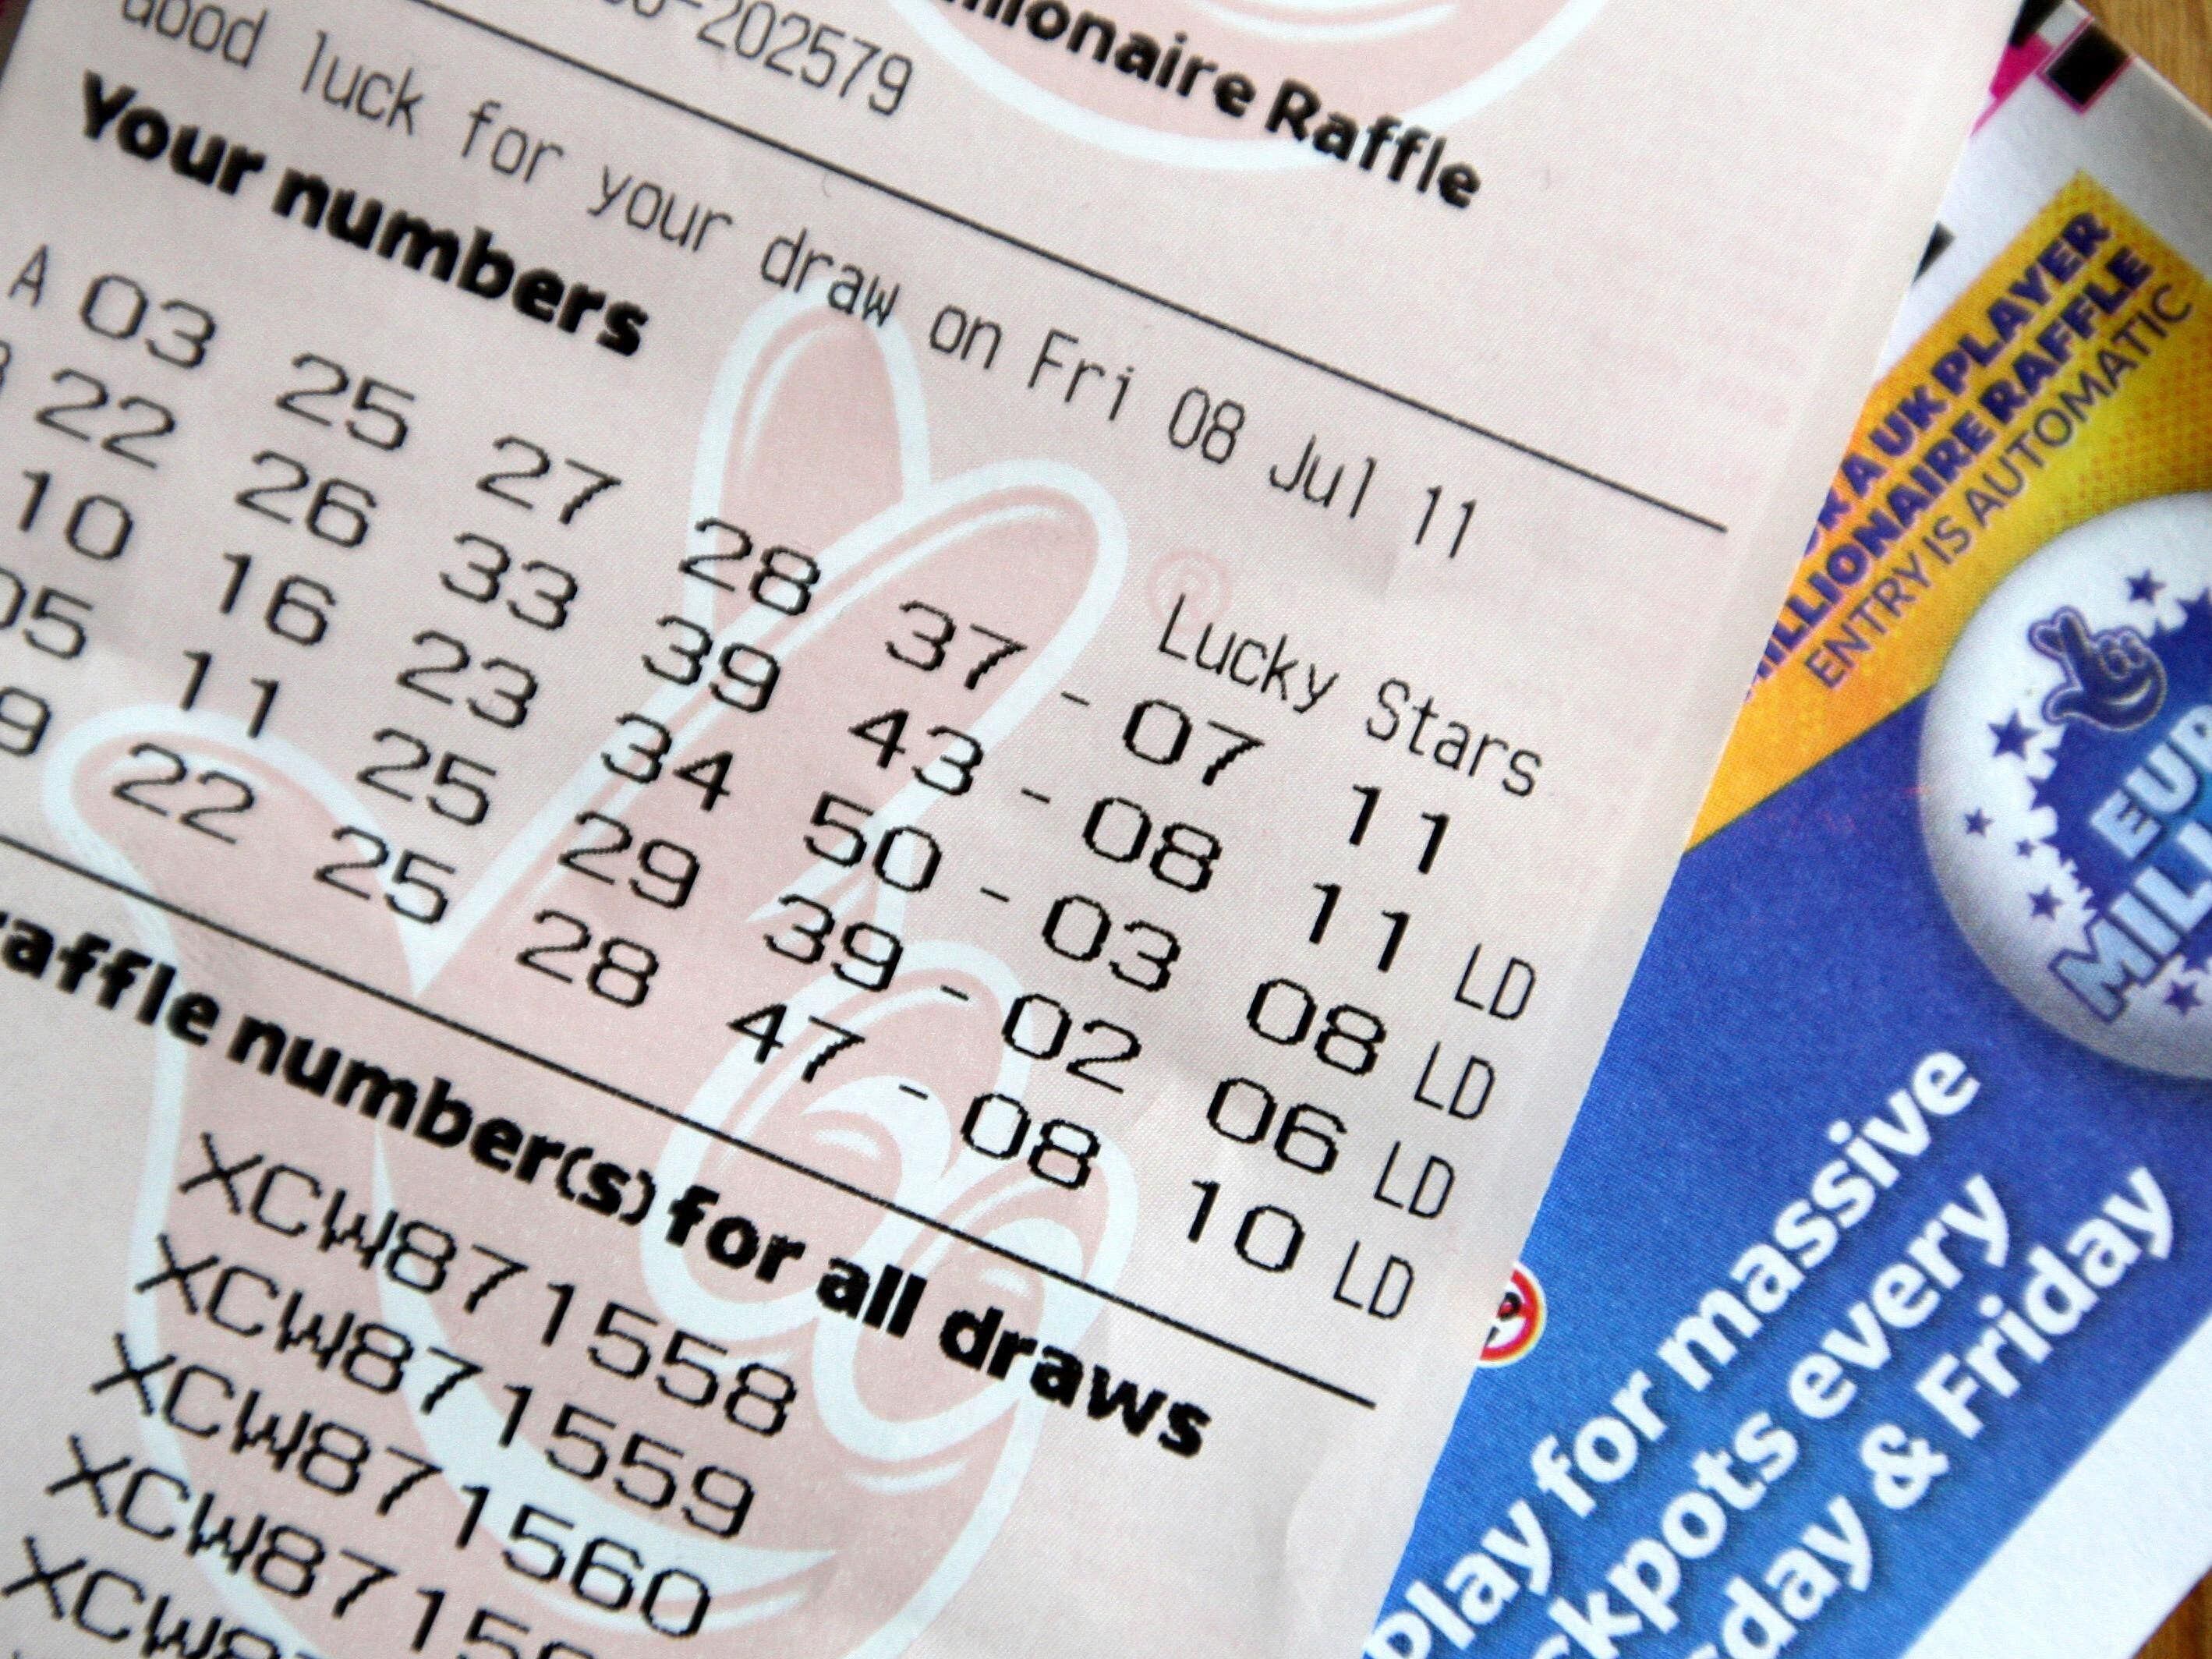 Claim received for Friday’s £33 million EuroMillions jackpot